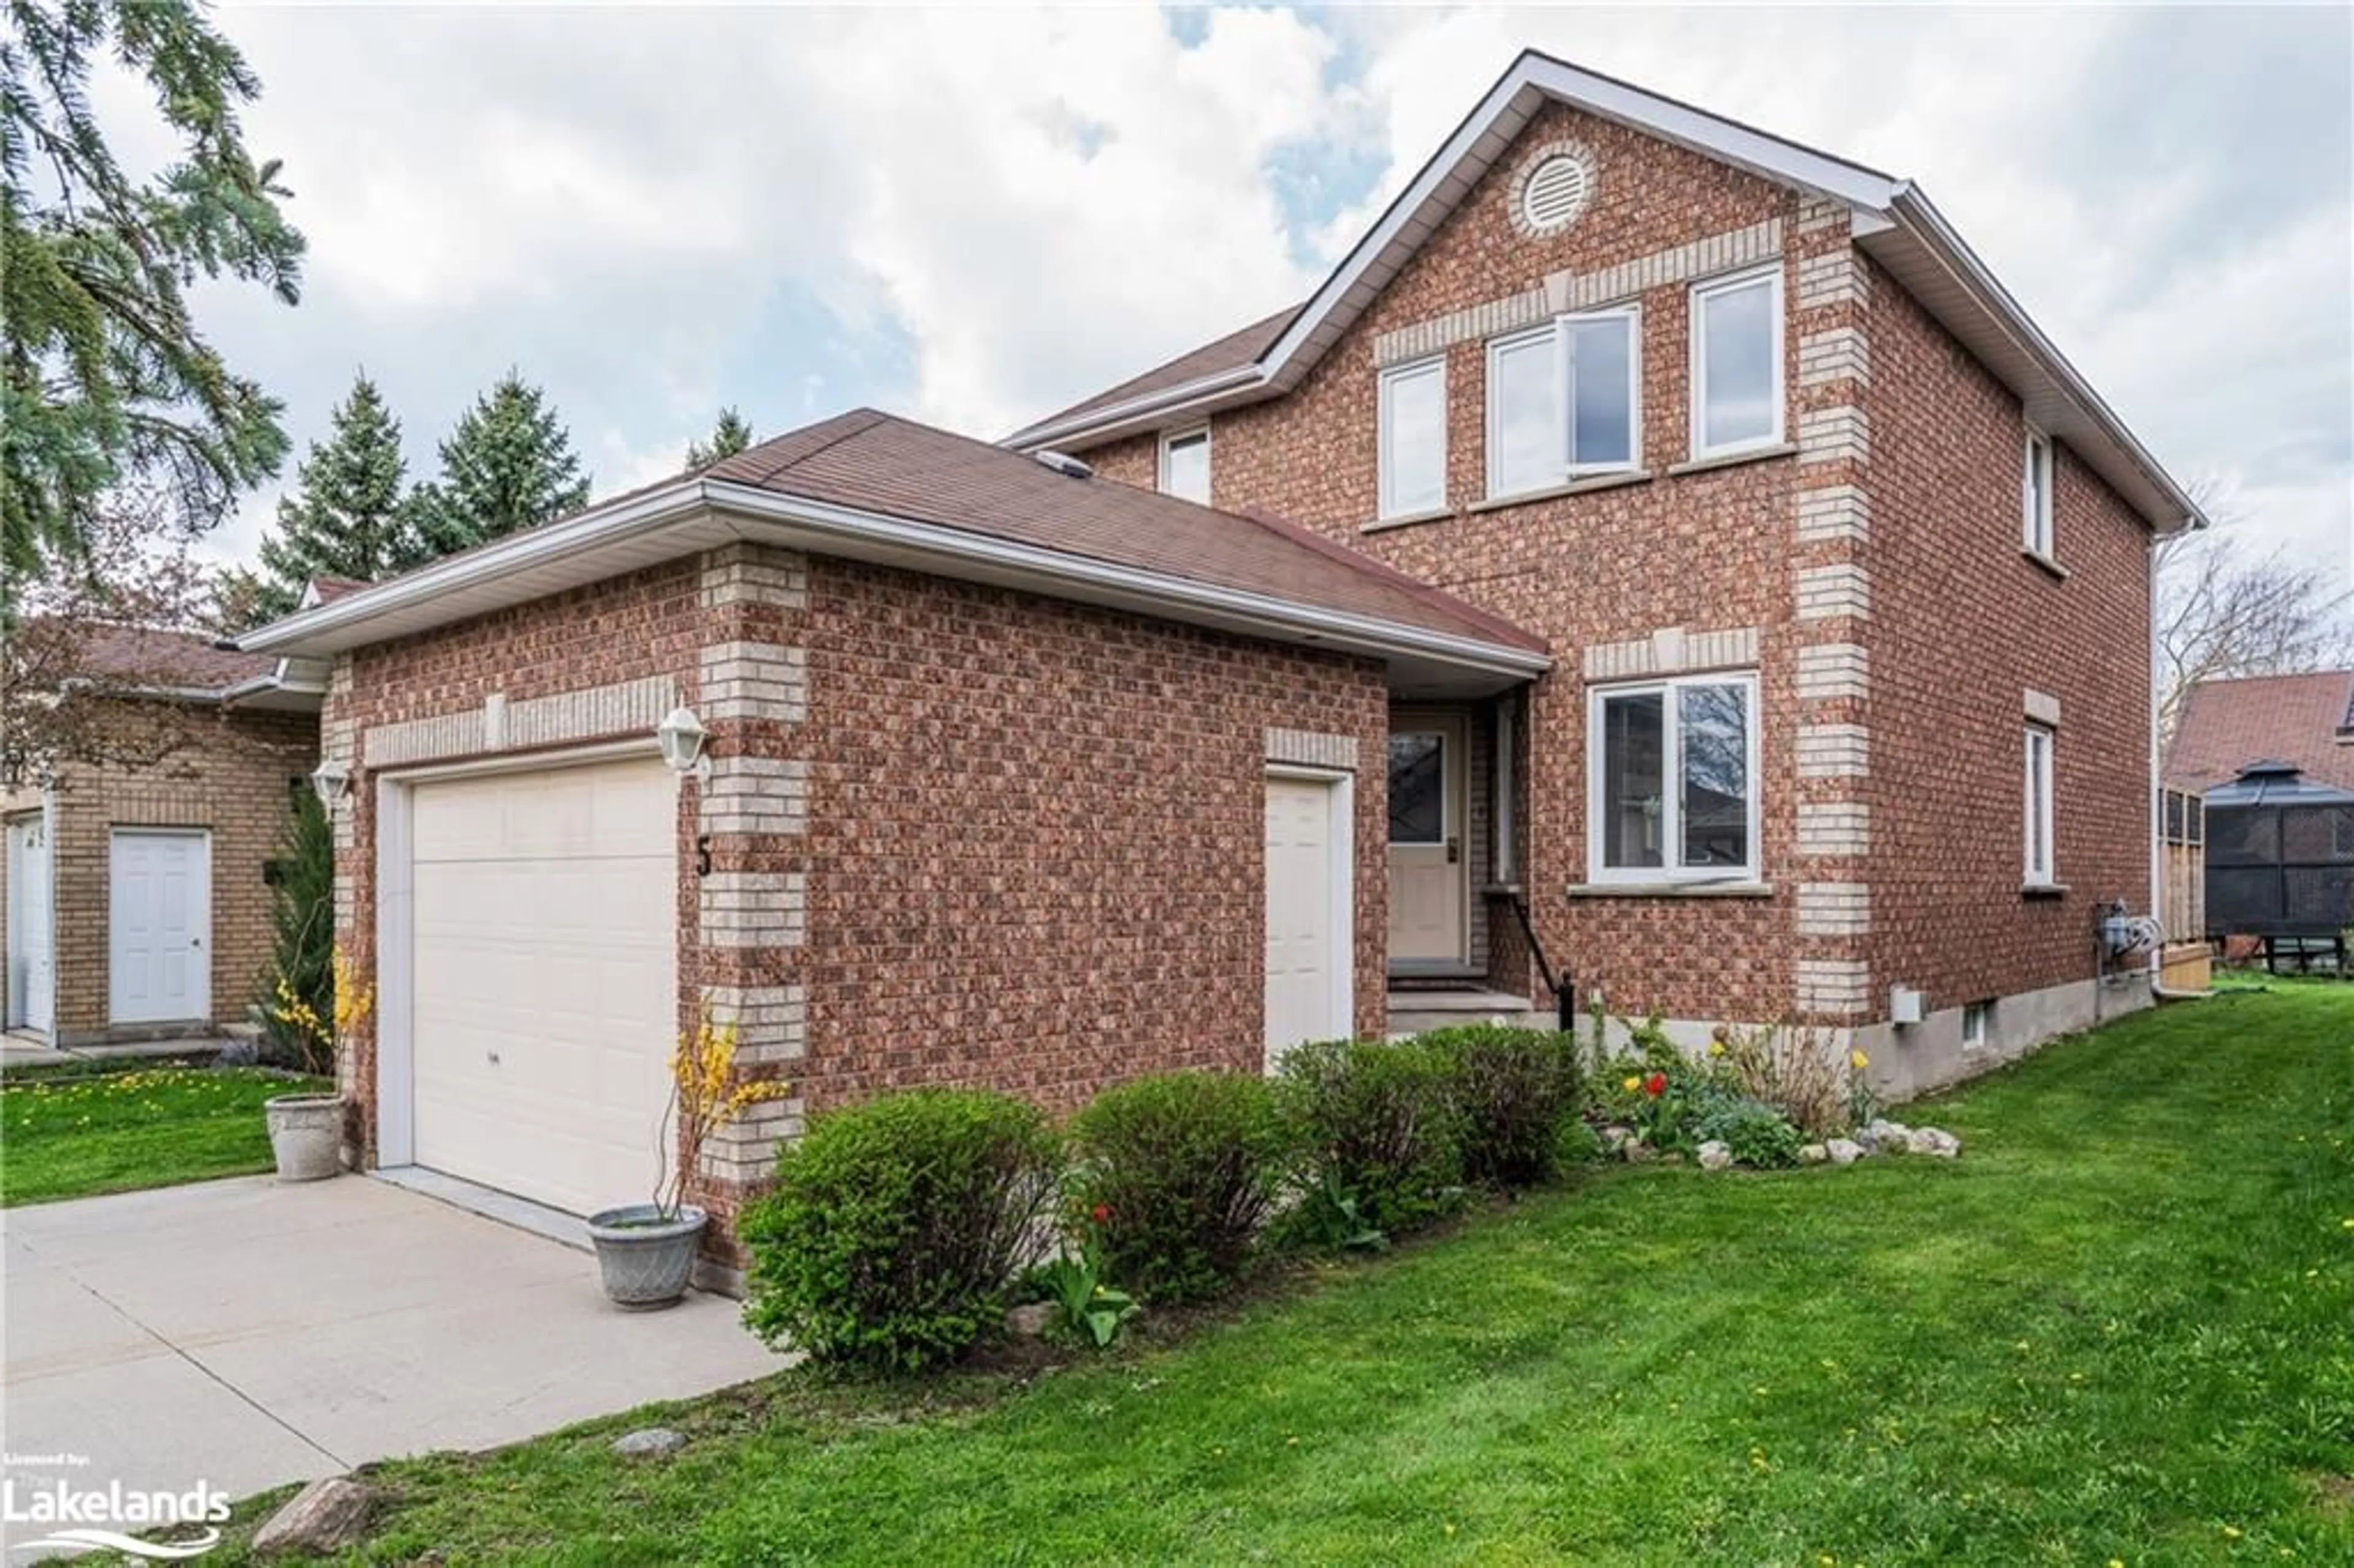 Home with brick exterior material for 5 Lockhart Rd, Collingwood Ontario L9Y 4X7